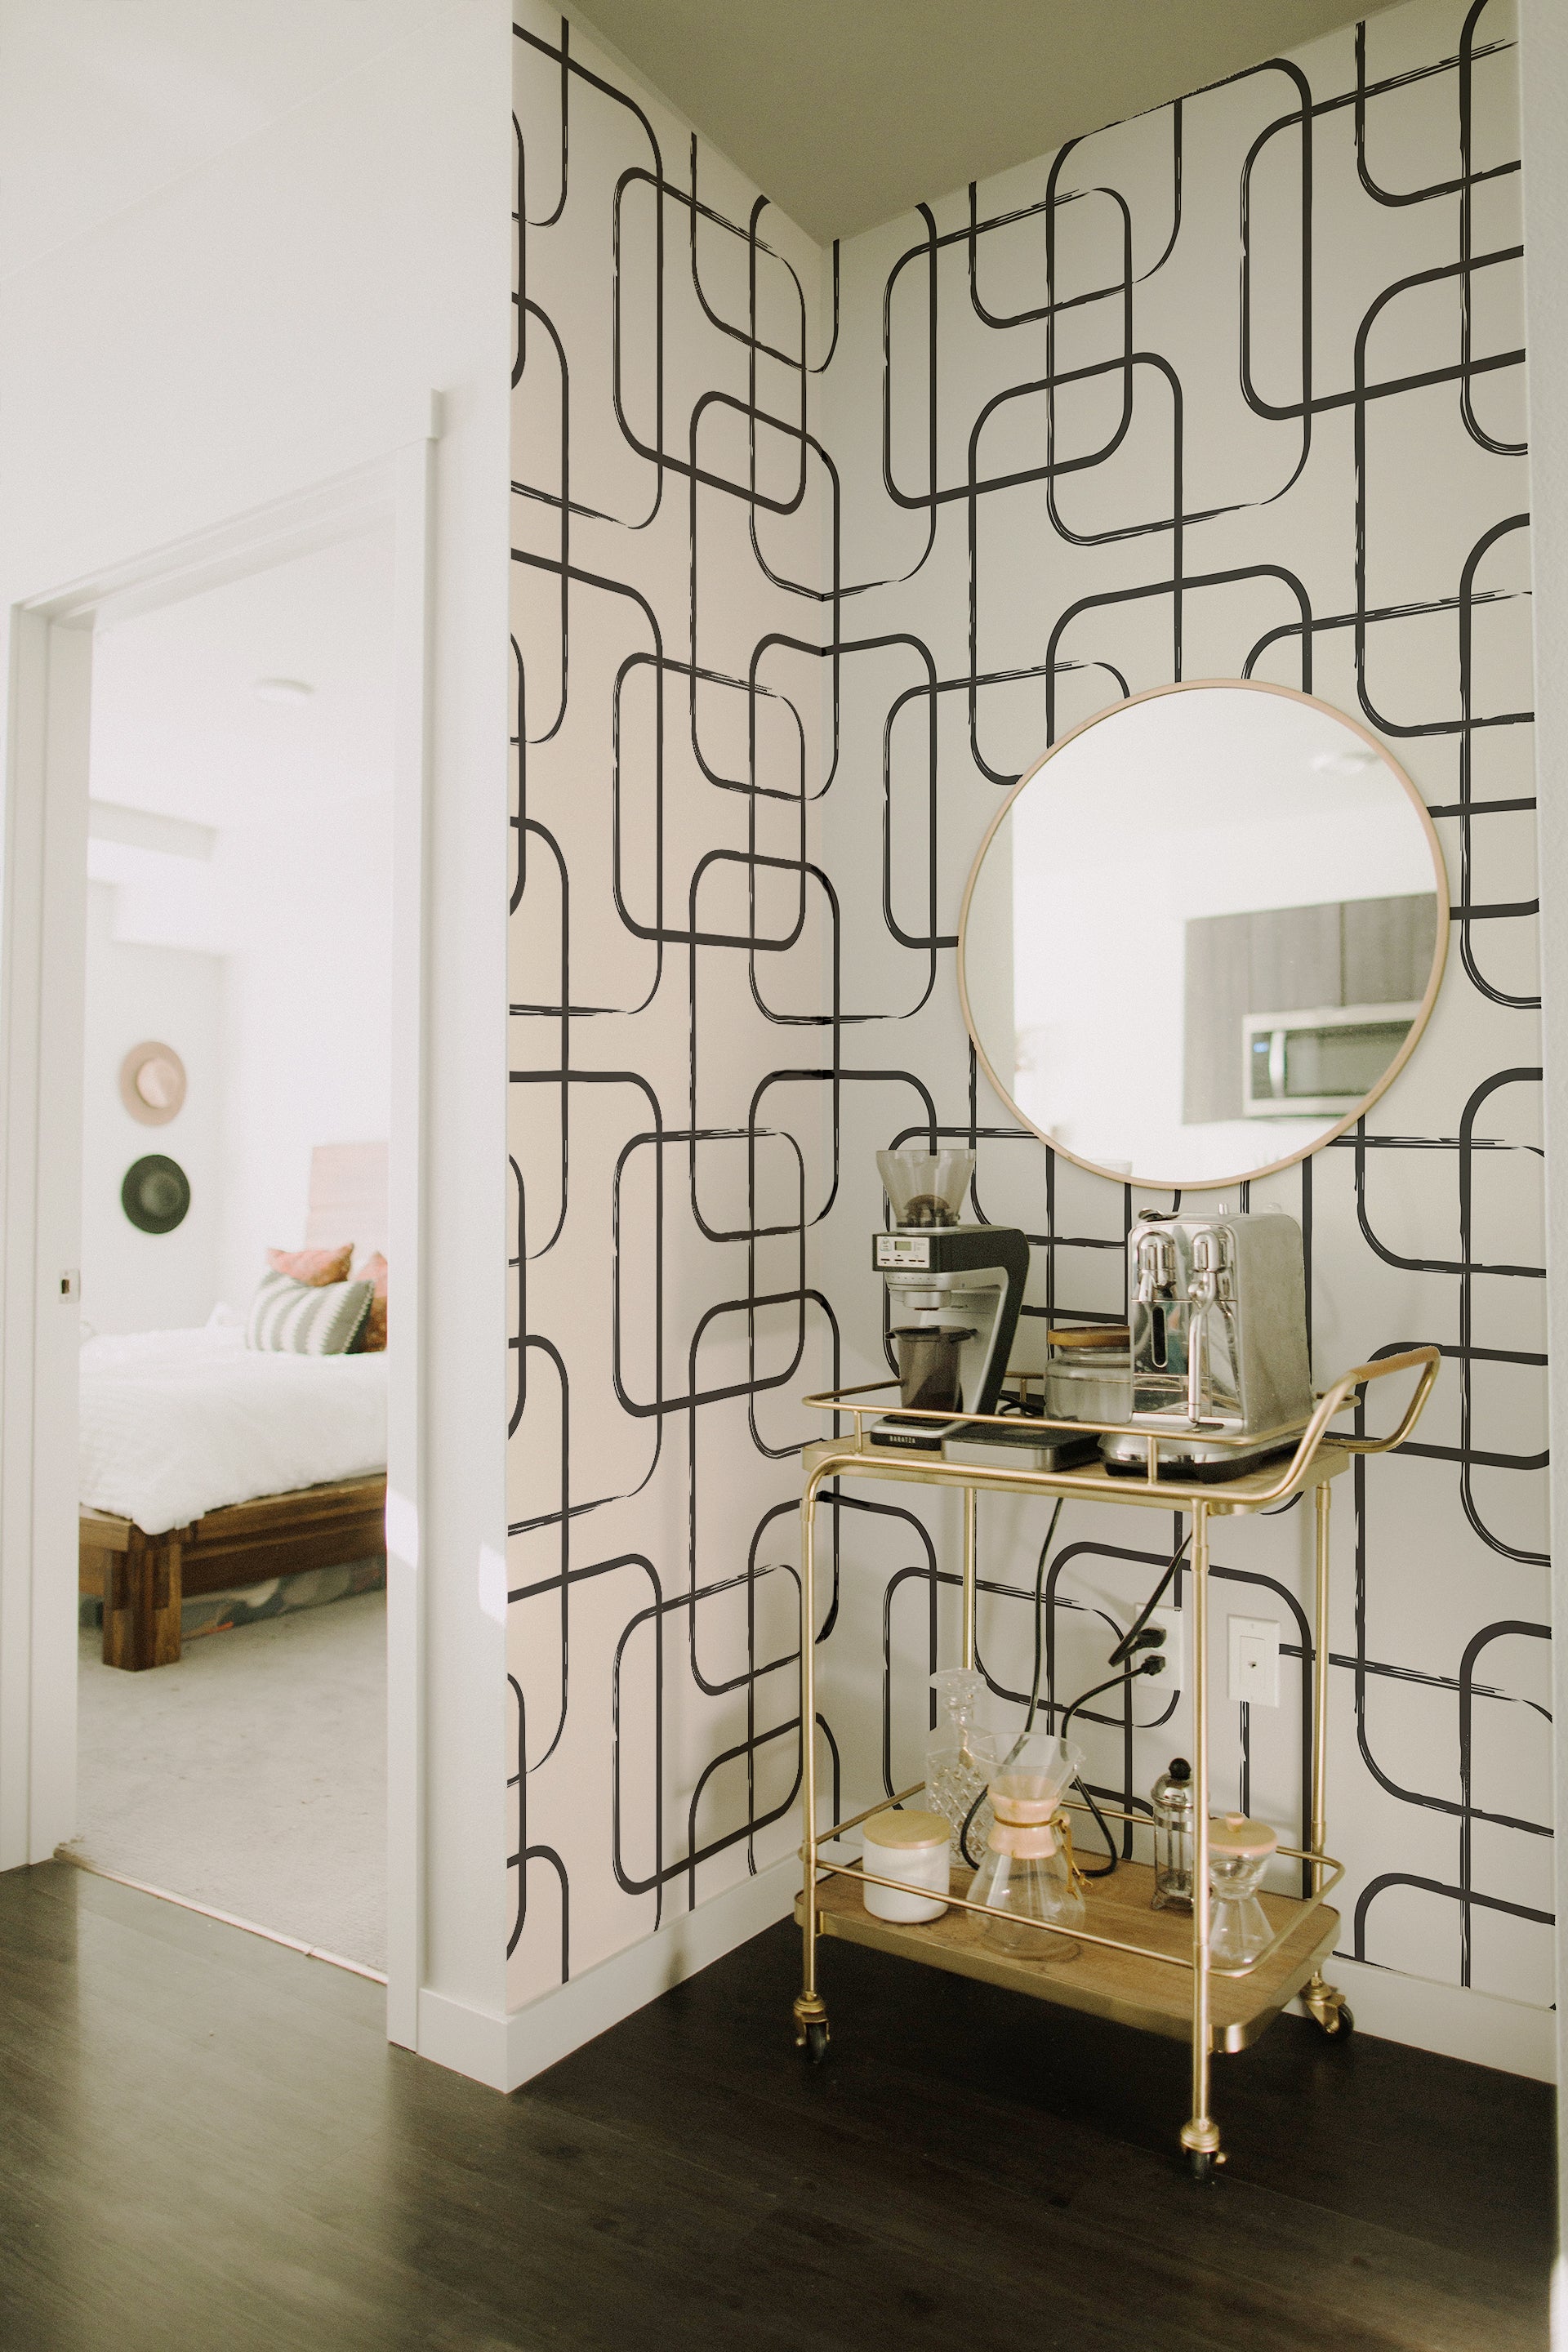 A stylish corner of a room with Midnight Wallpaper, featuring bold black lines creating a geometric grid pattern on a white background. A hanging wooden shelf displays home decor, and a canvas tote with abstract face embroidery leans against the wall.